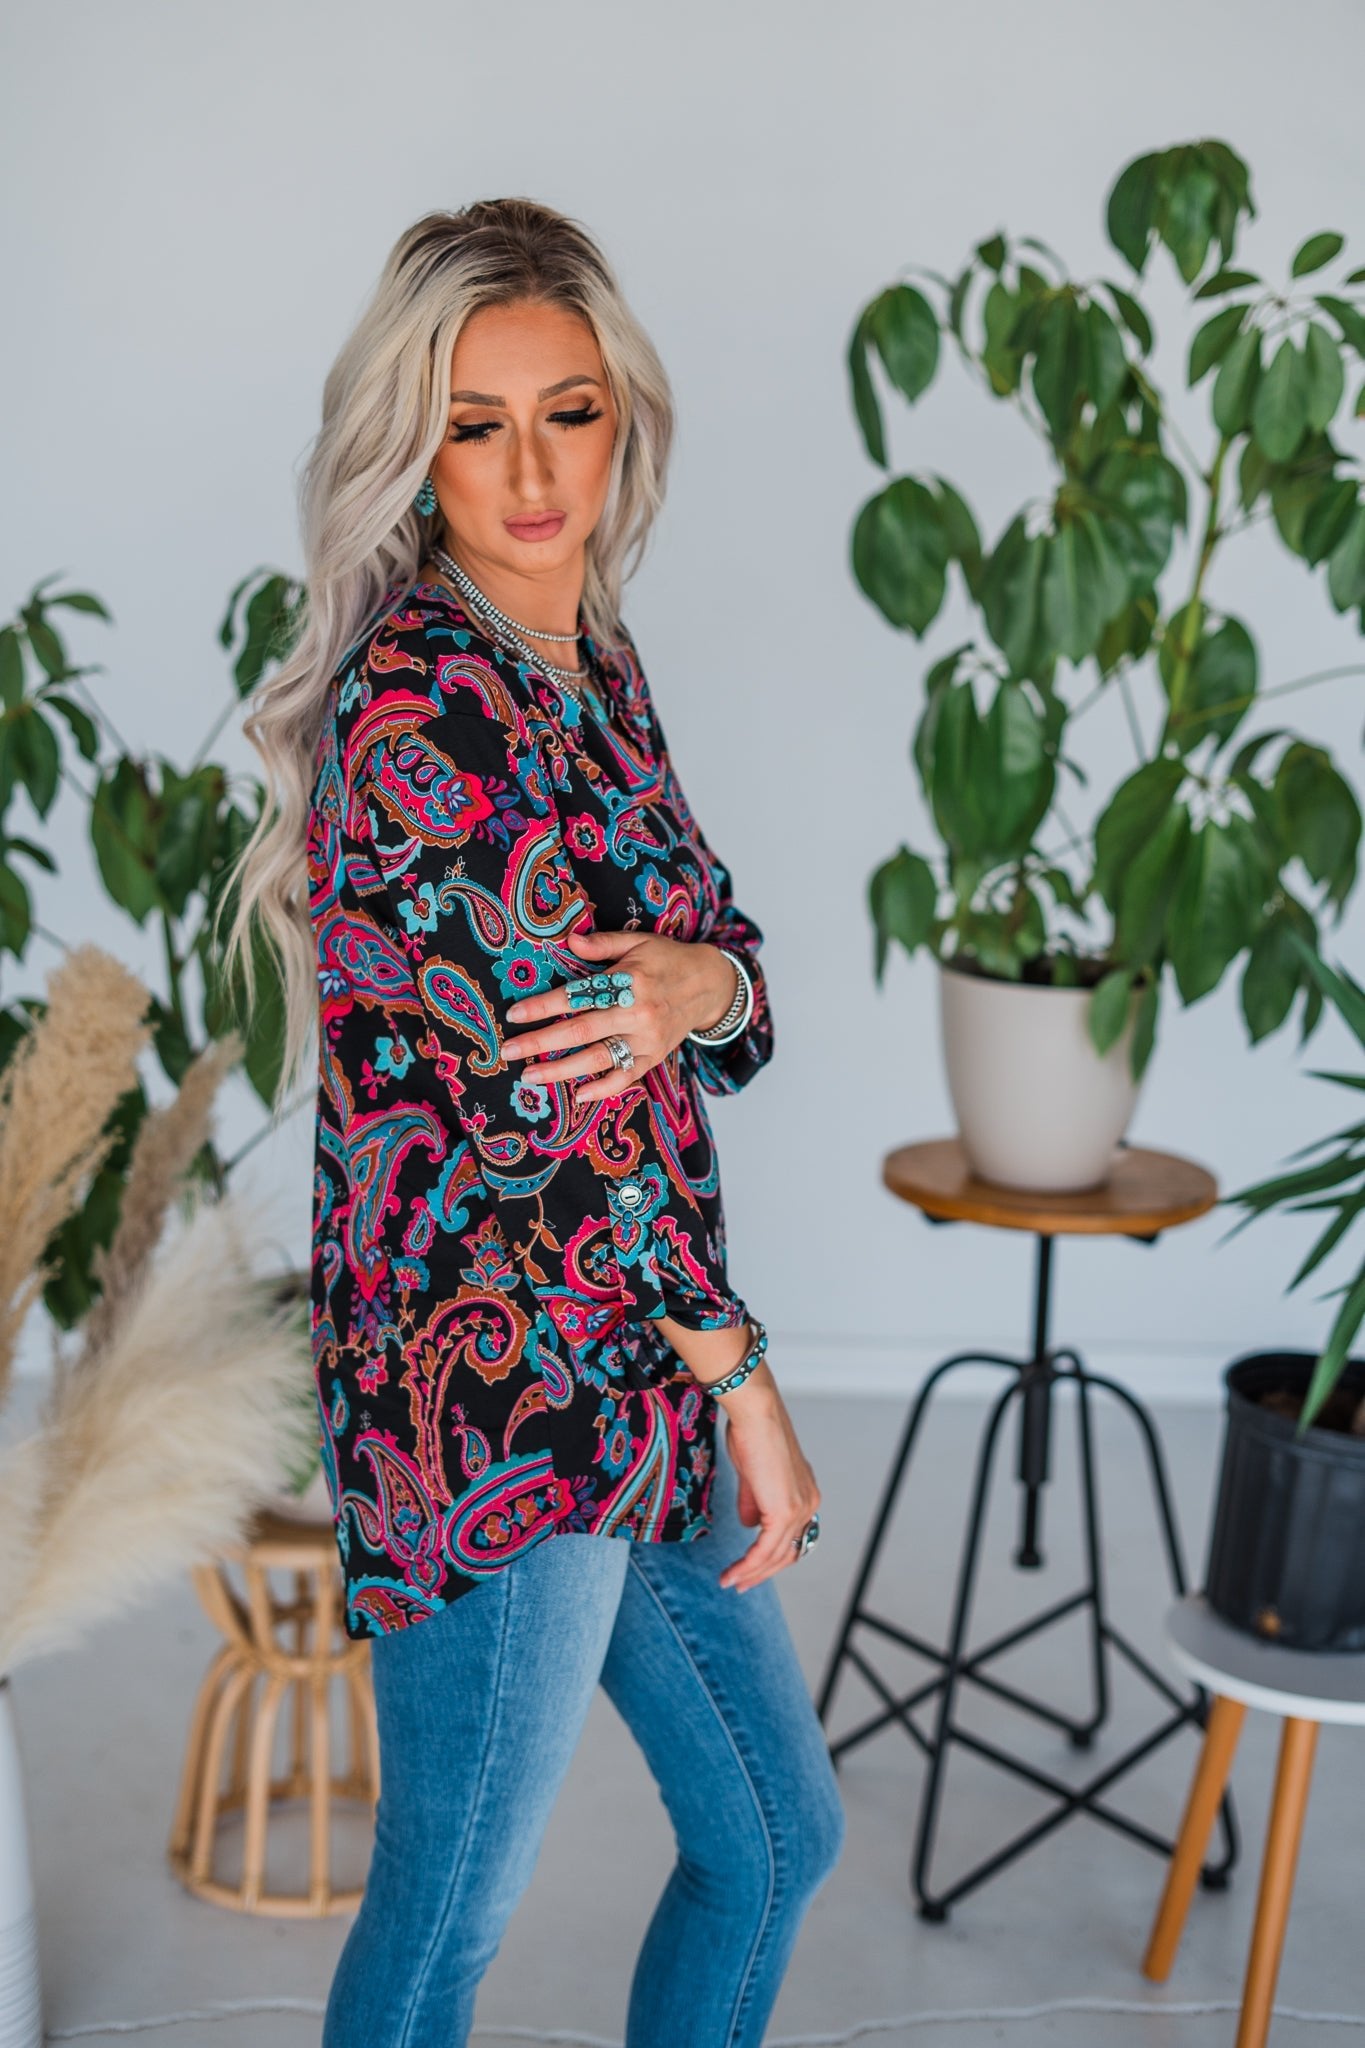 Floral & Paisley Floral 3/4 Sleeve Lizzy V-Neck Top - Whiskey Skies